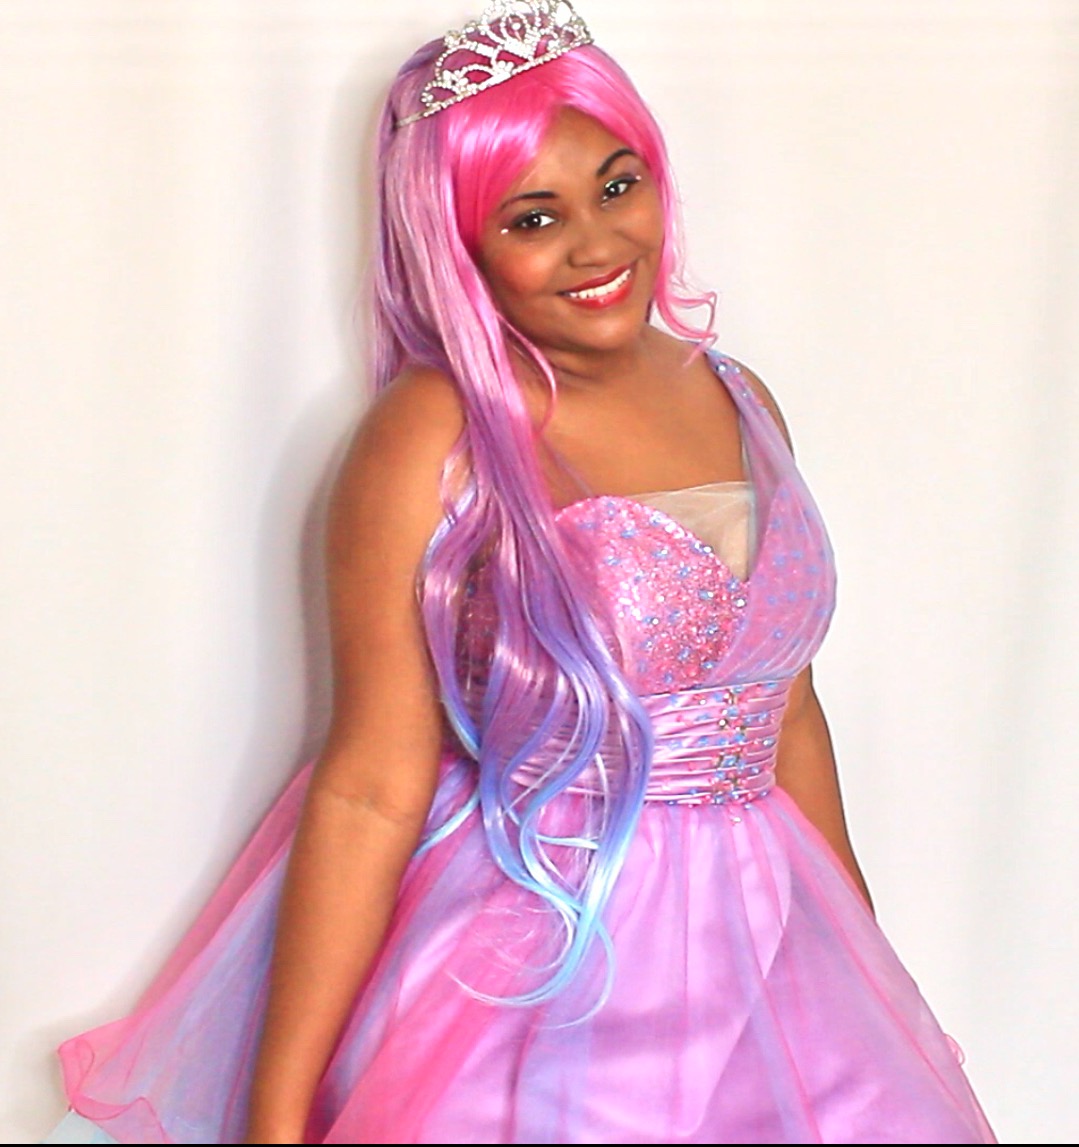 Yaymaker Host Princess Dee located in CYPRESS, CA